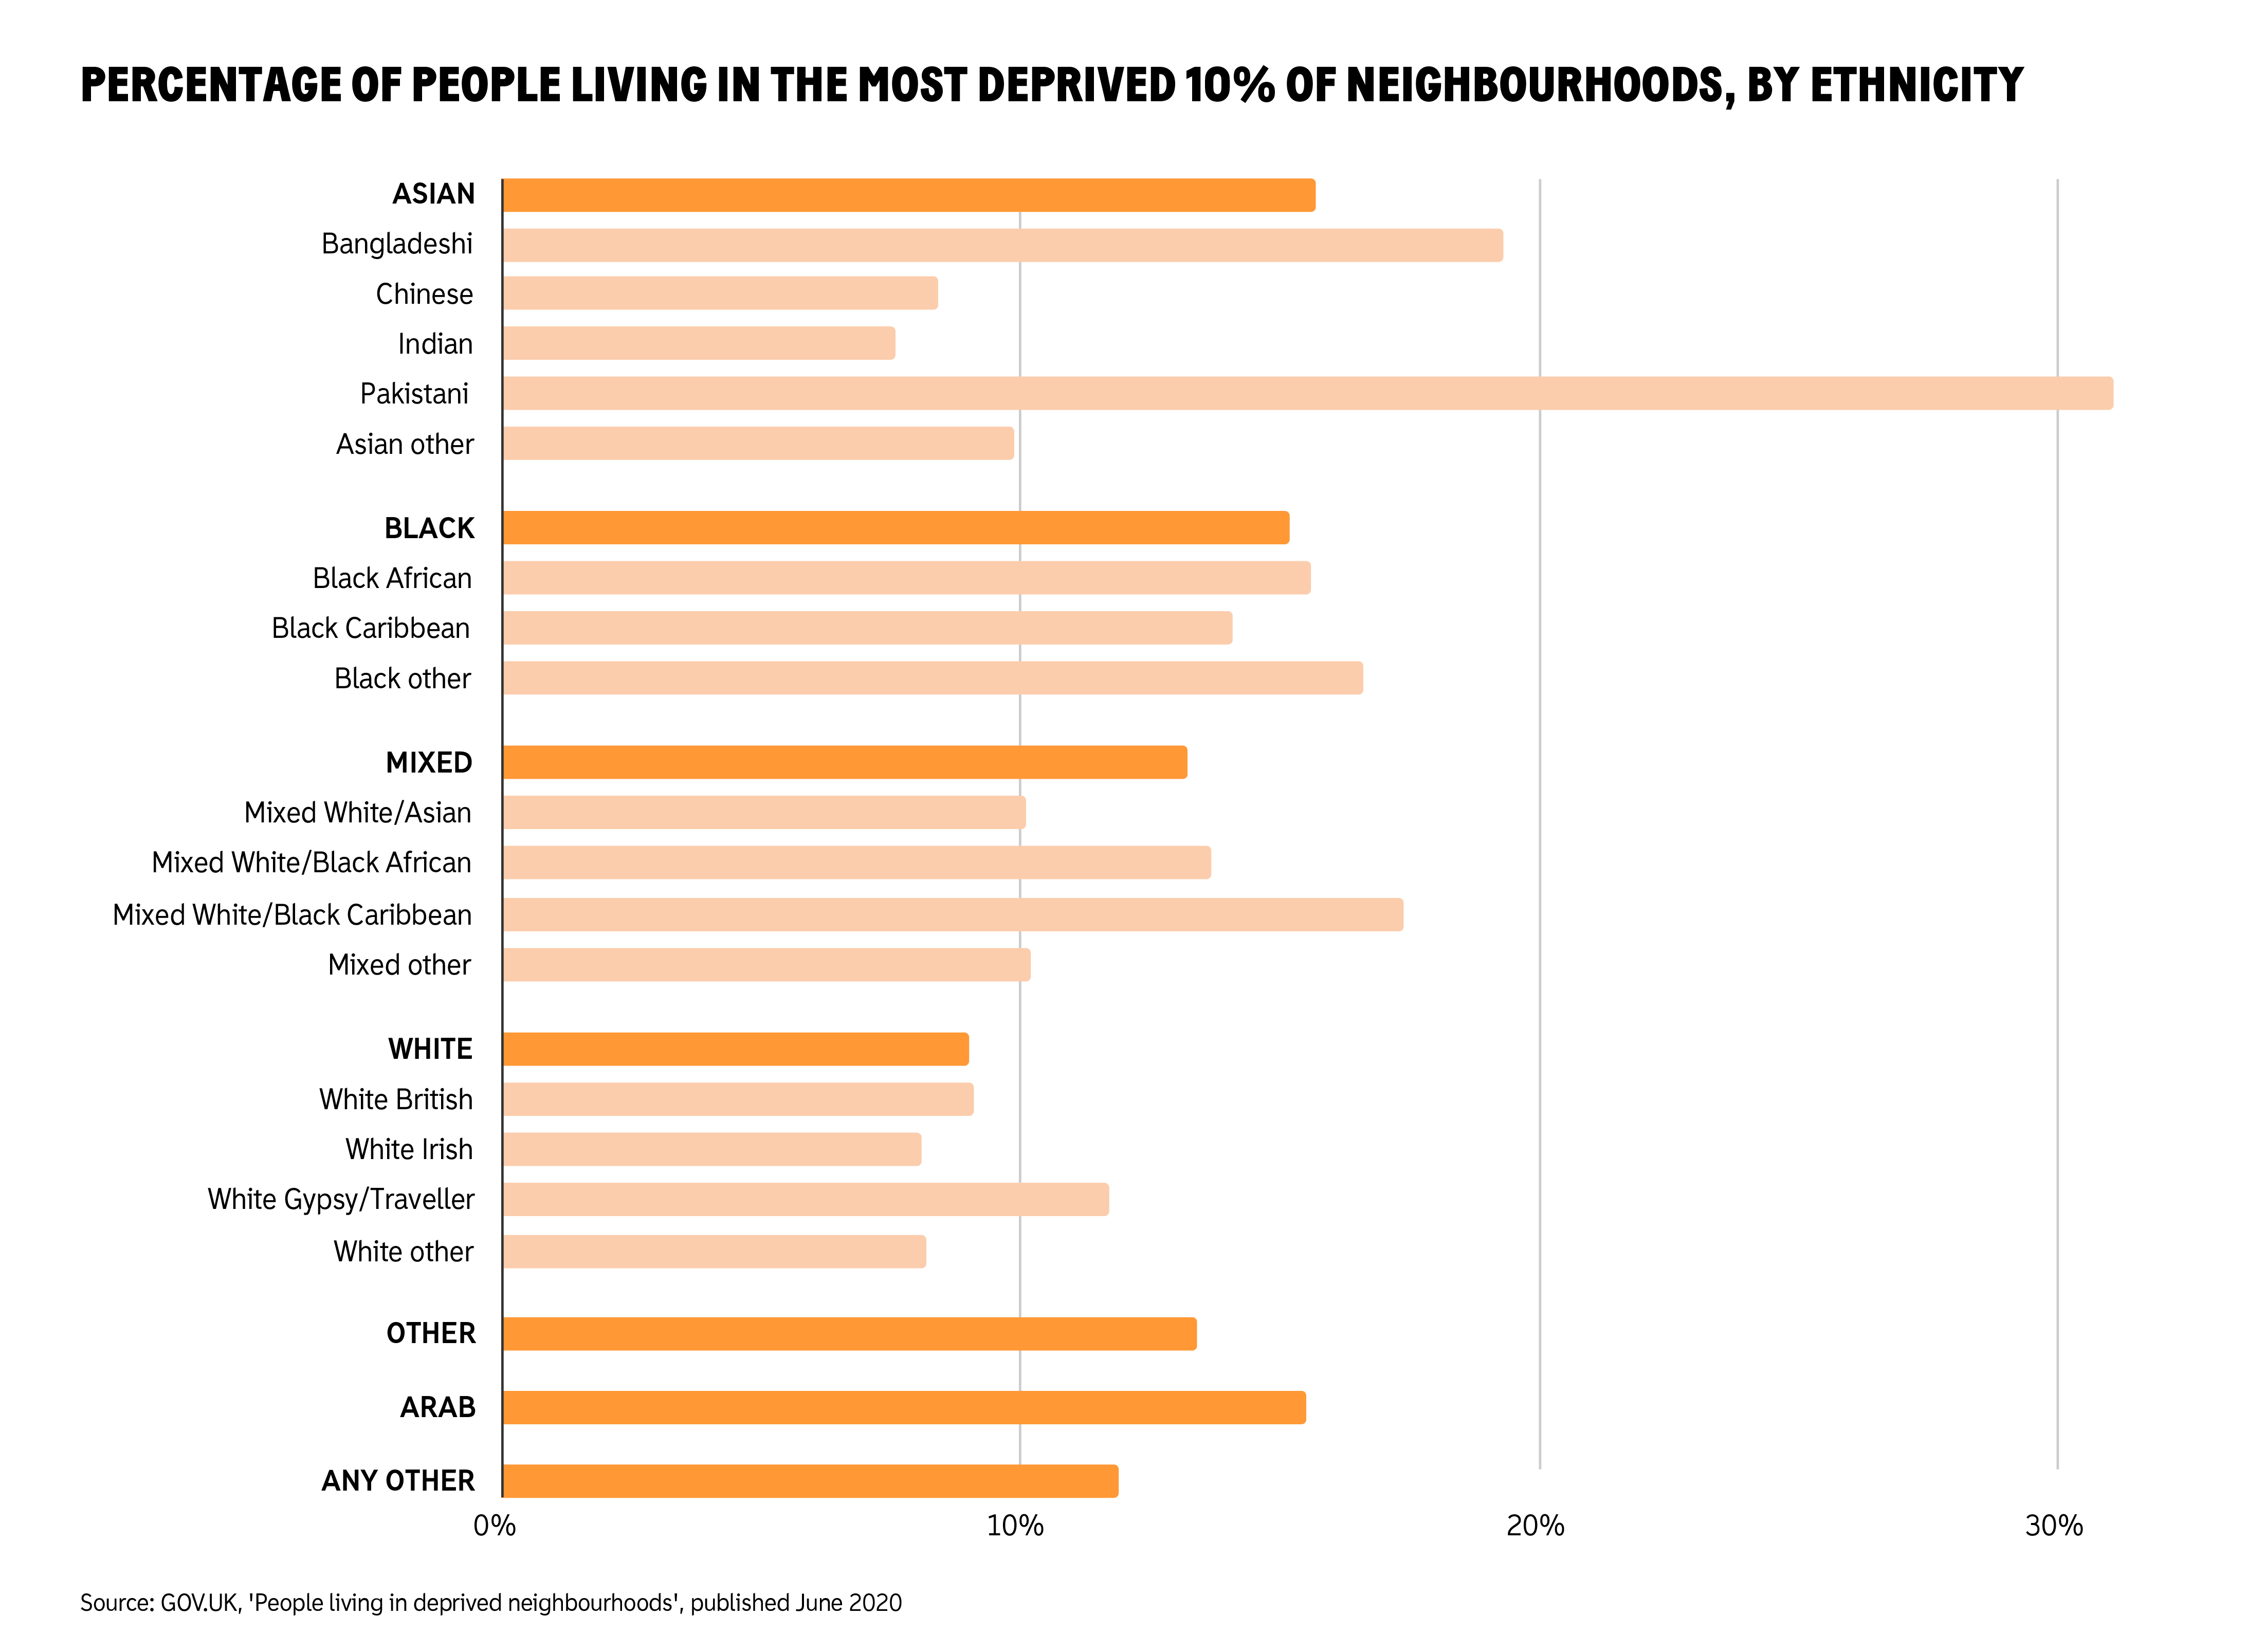 Bar chart showing the percentage of people living in the most deprived 10% of neighbourhoods, by ethnicity. Bangladeshi, and Pakistani are the highest. Indian and White Irish are lowest. Of the broad racial categories, White comes in noticeably lower than Asian, Black, Mixed, Arab or Other.